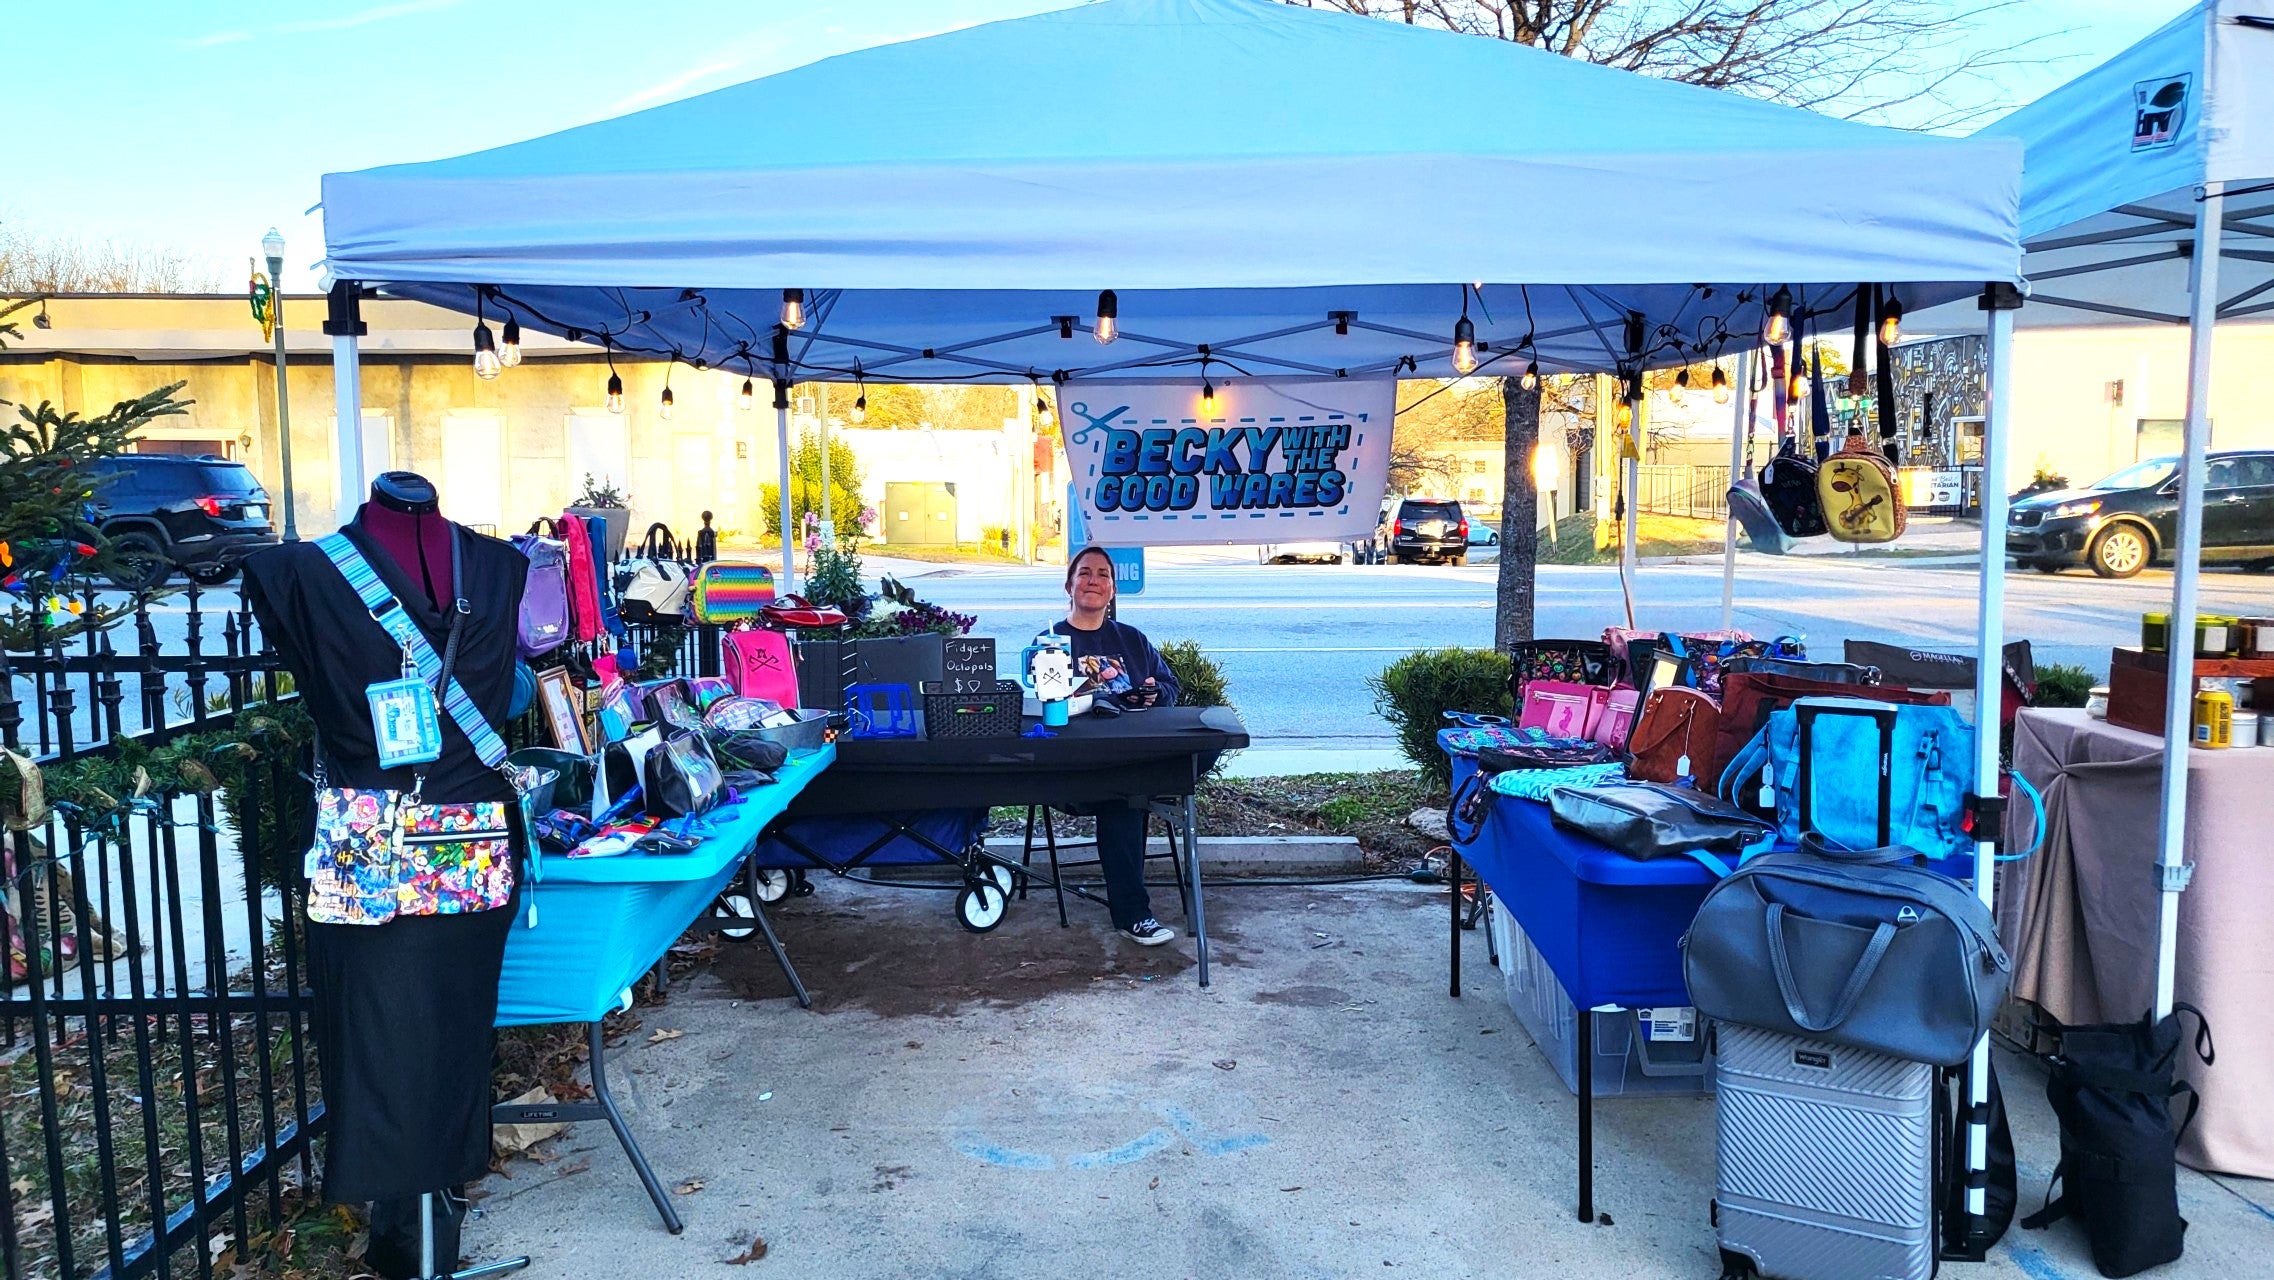 Becky set up at a booth, selling her purses.